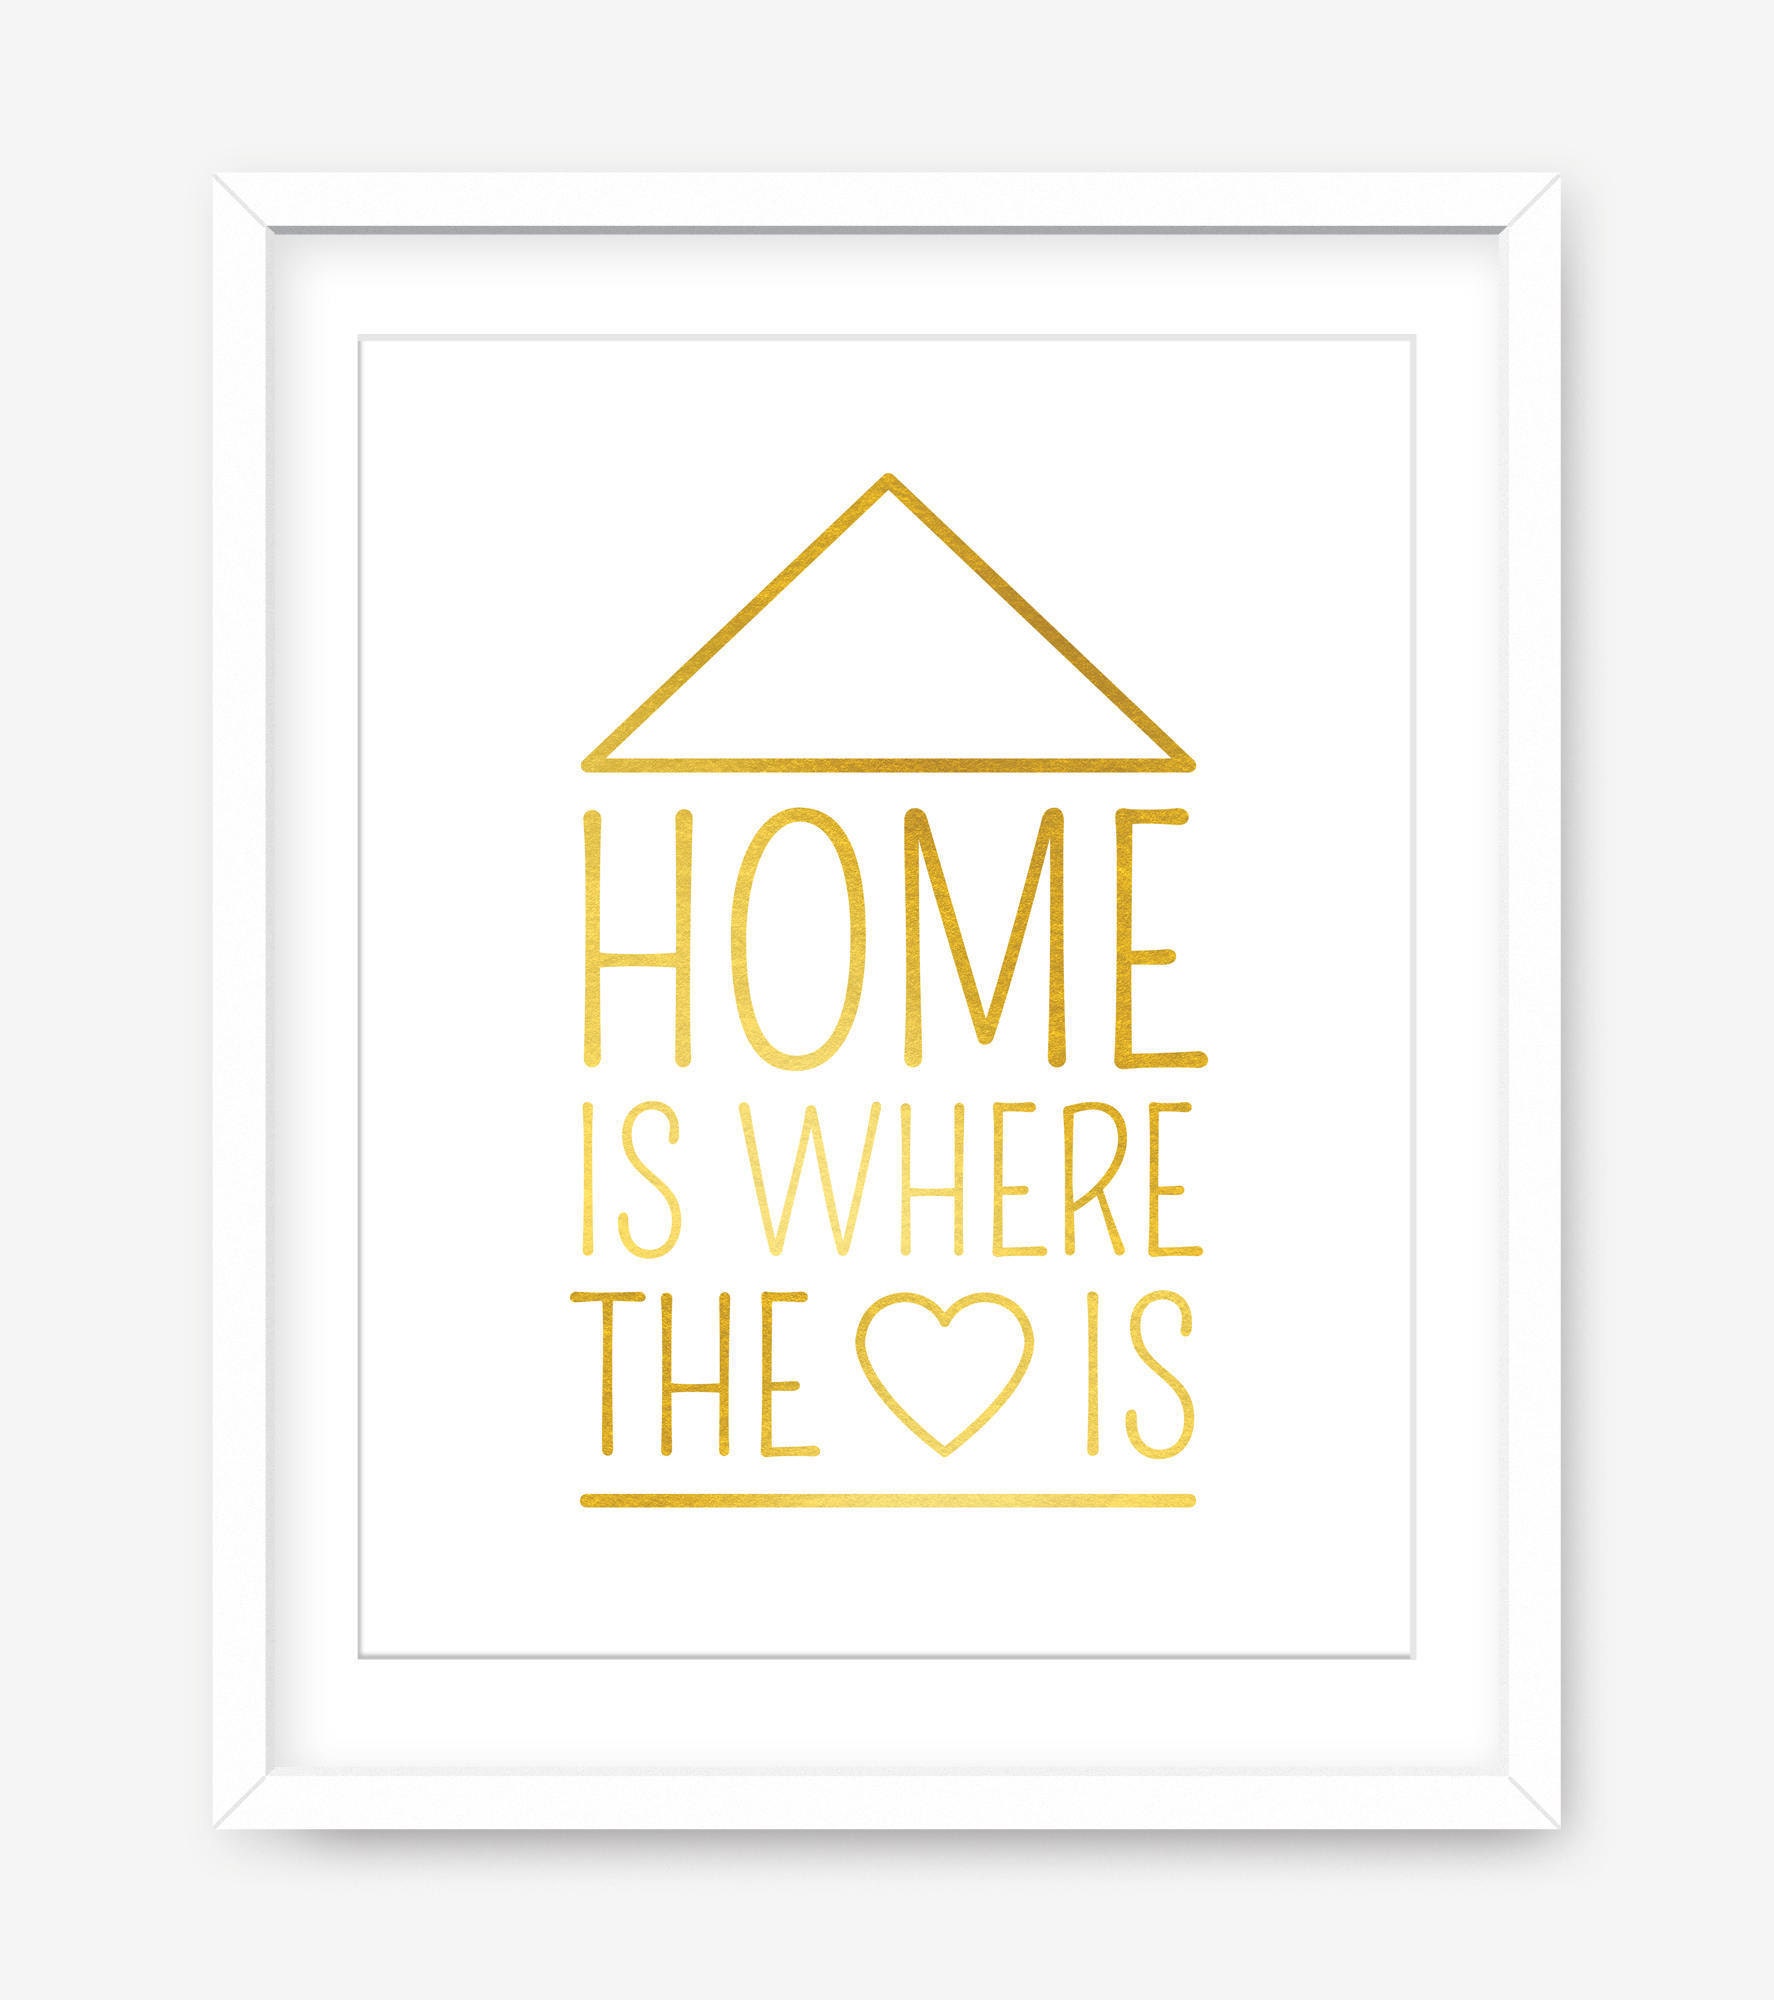 home is where the heart is essay